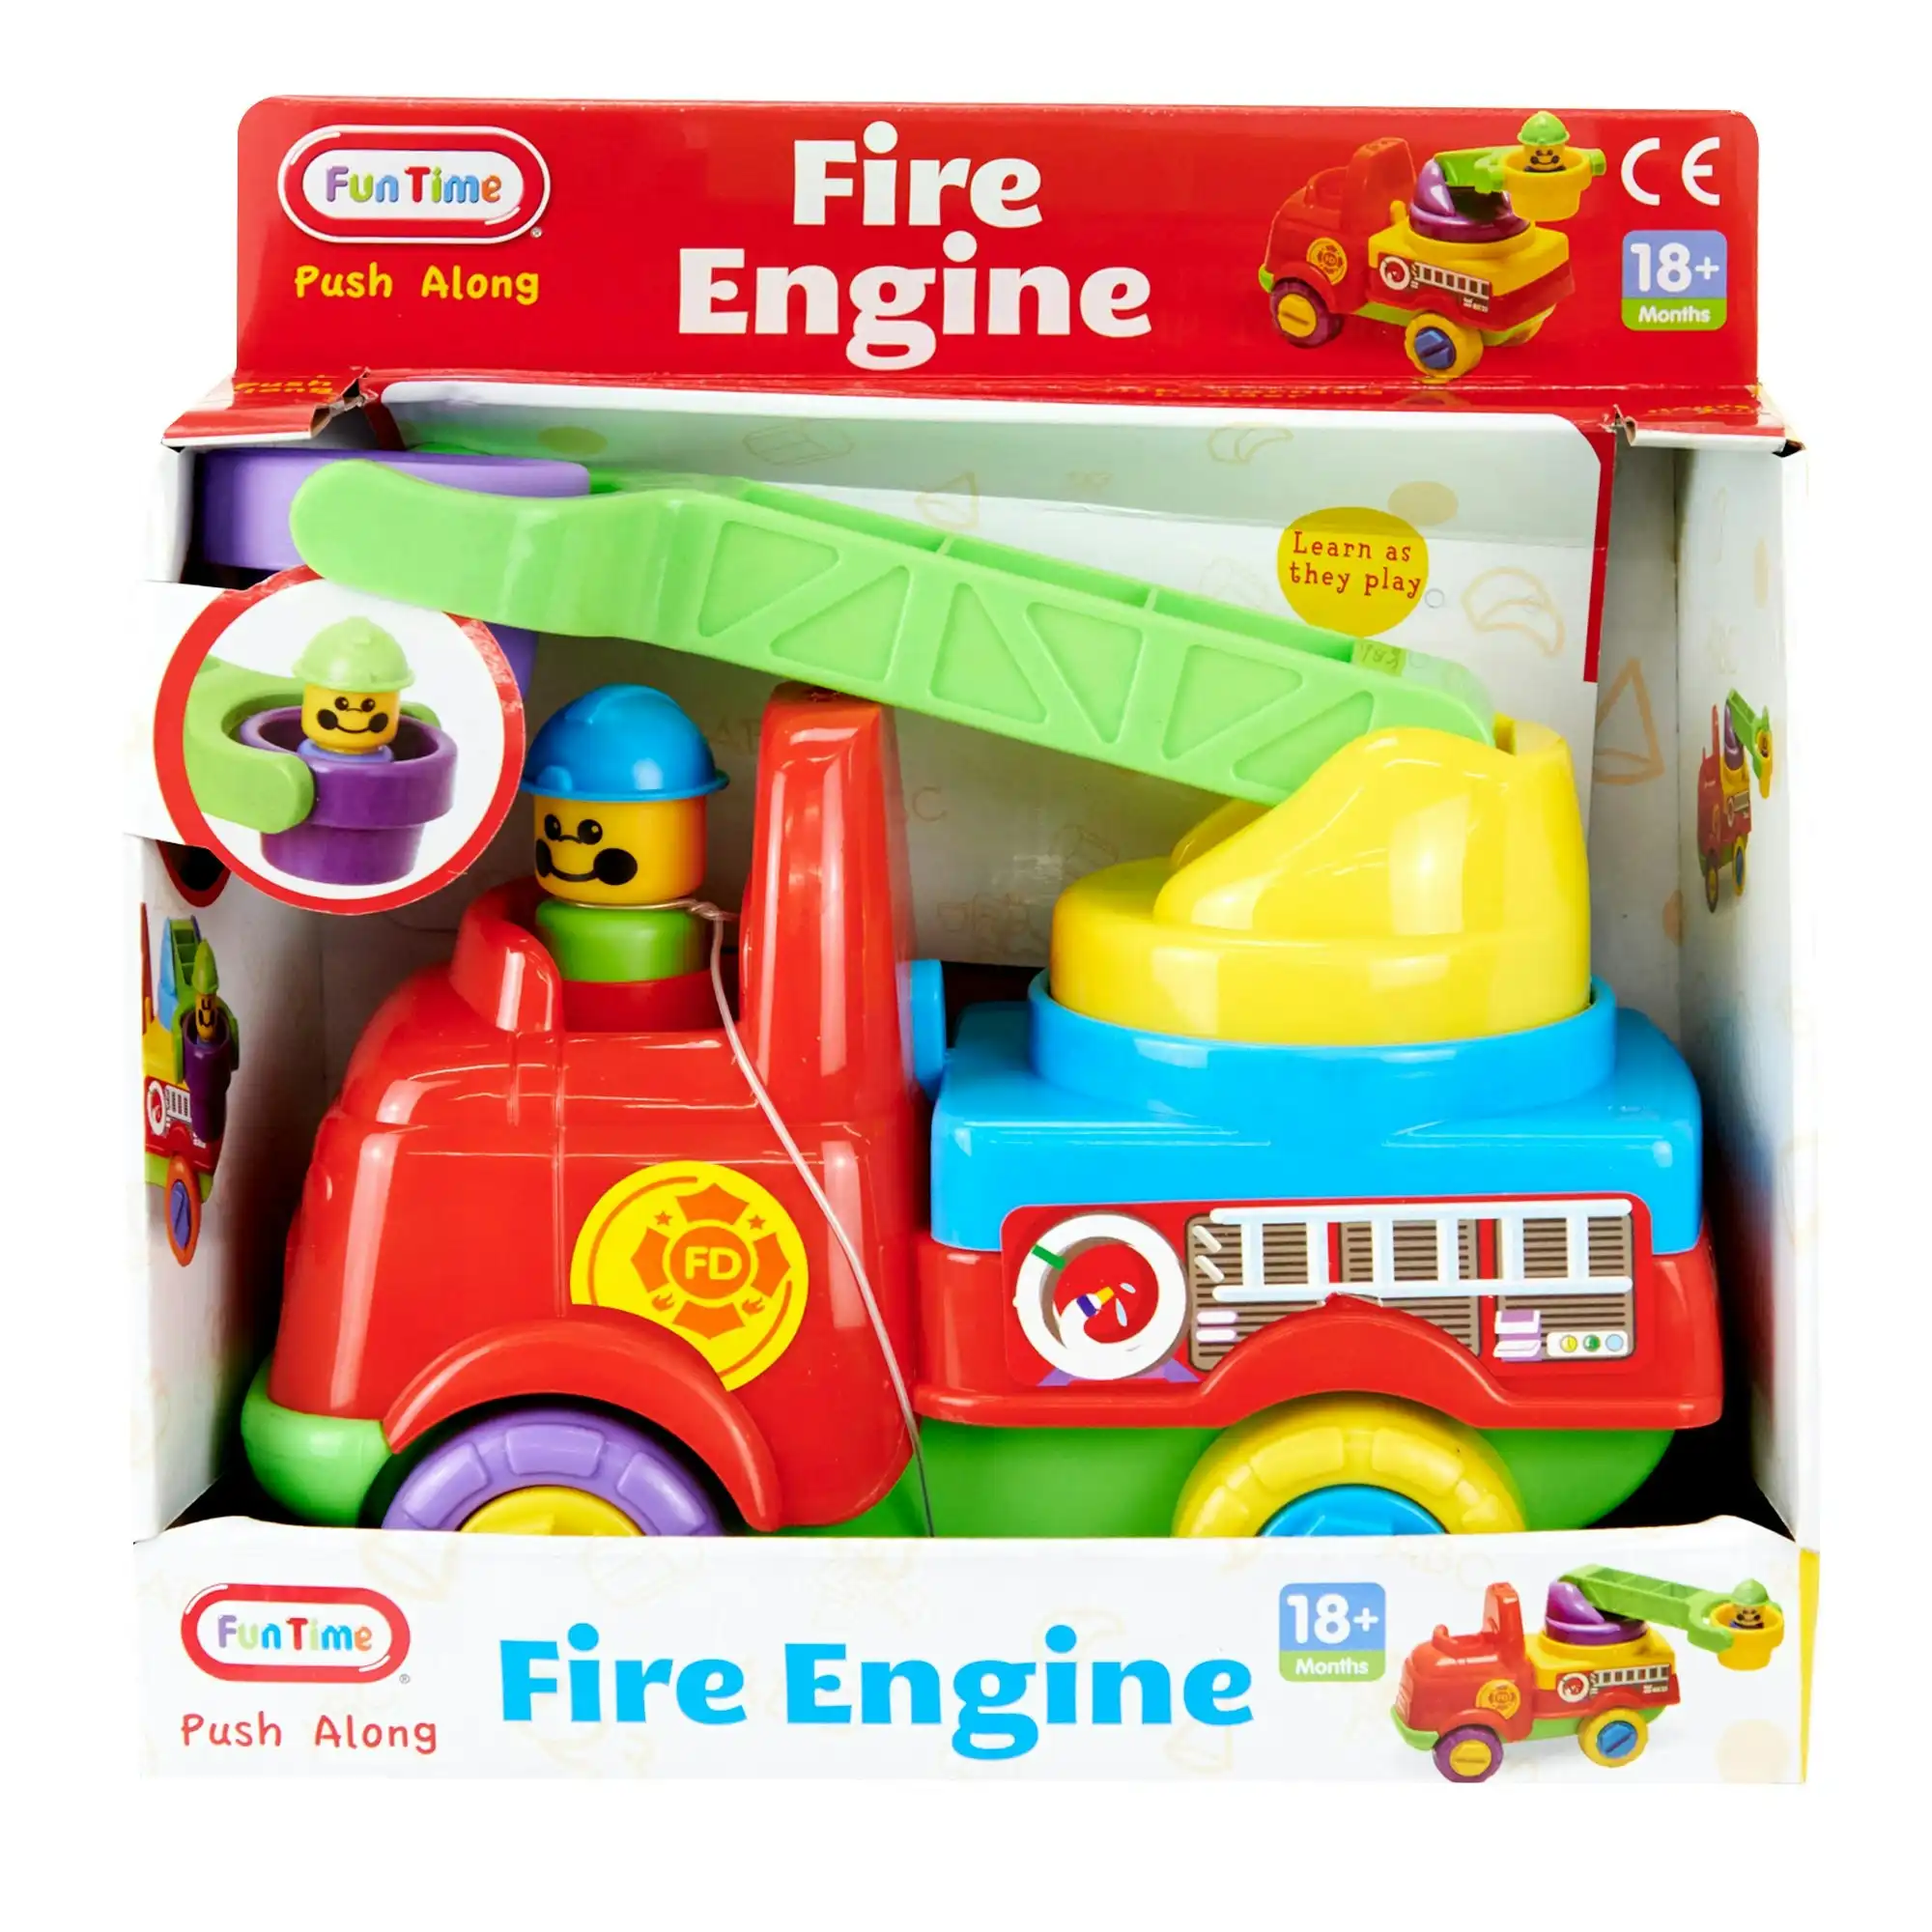 Funtime Push Along Fire Engine